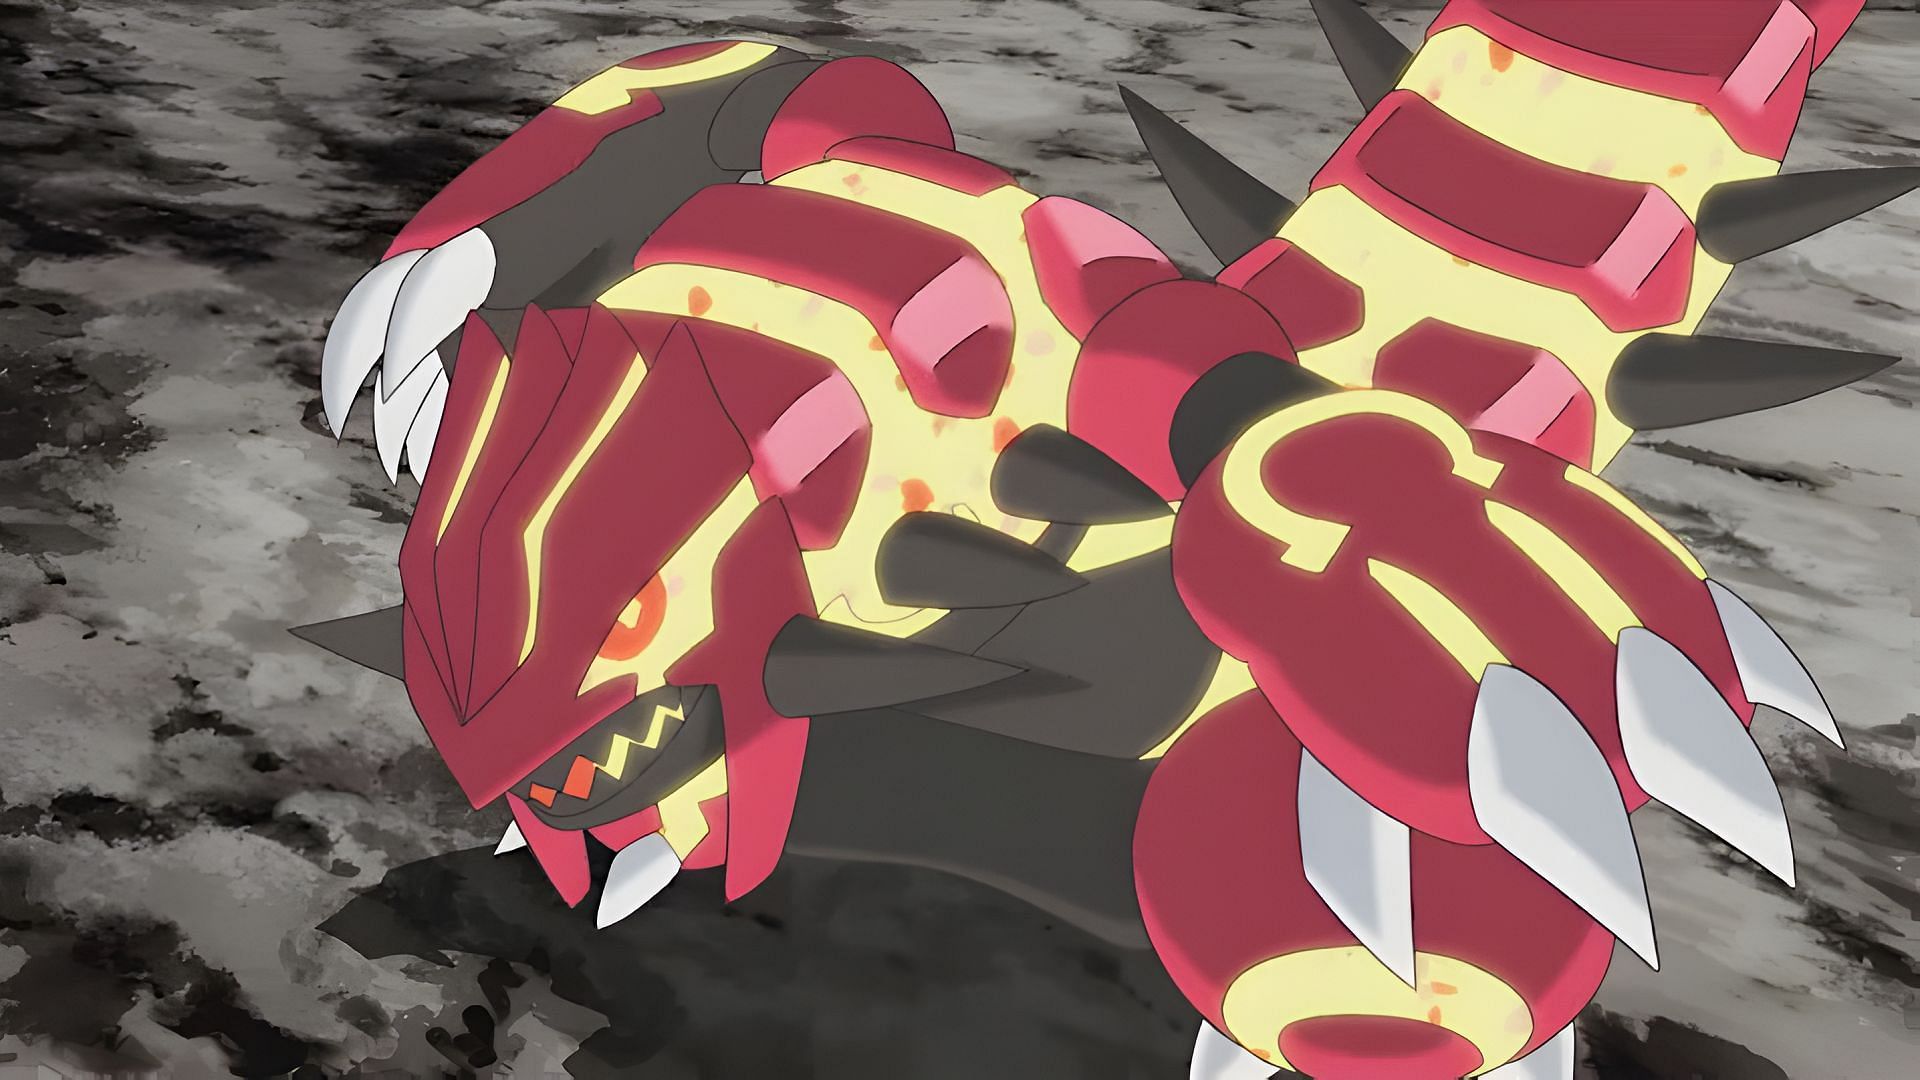 Groudon and its Primal Reversion ability would make for a great Monster Hunter boss (Image via The Pokemon Company)